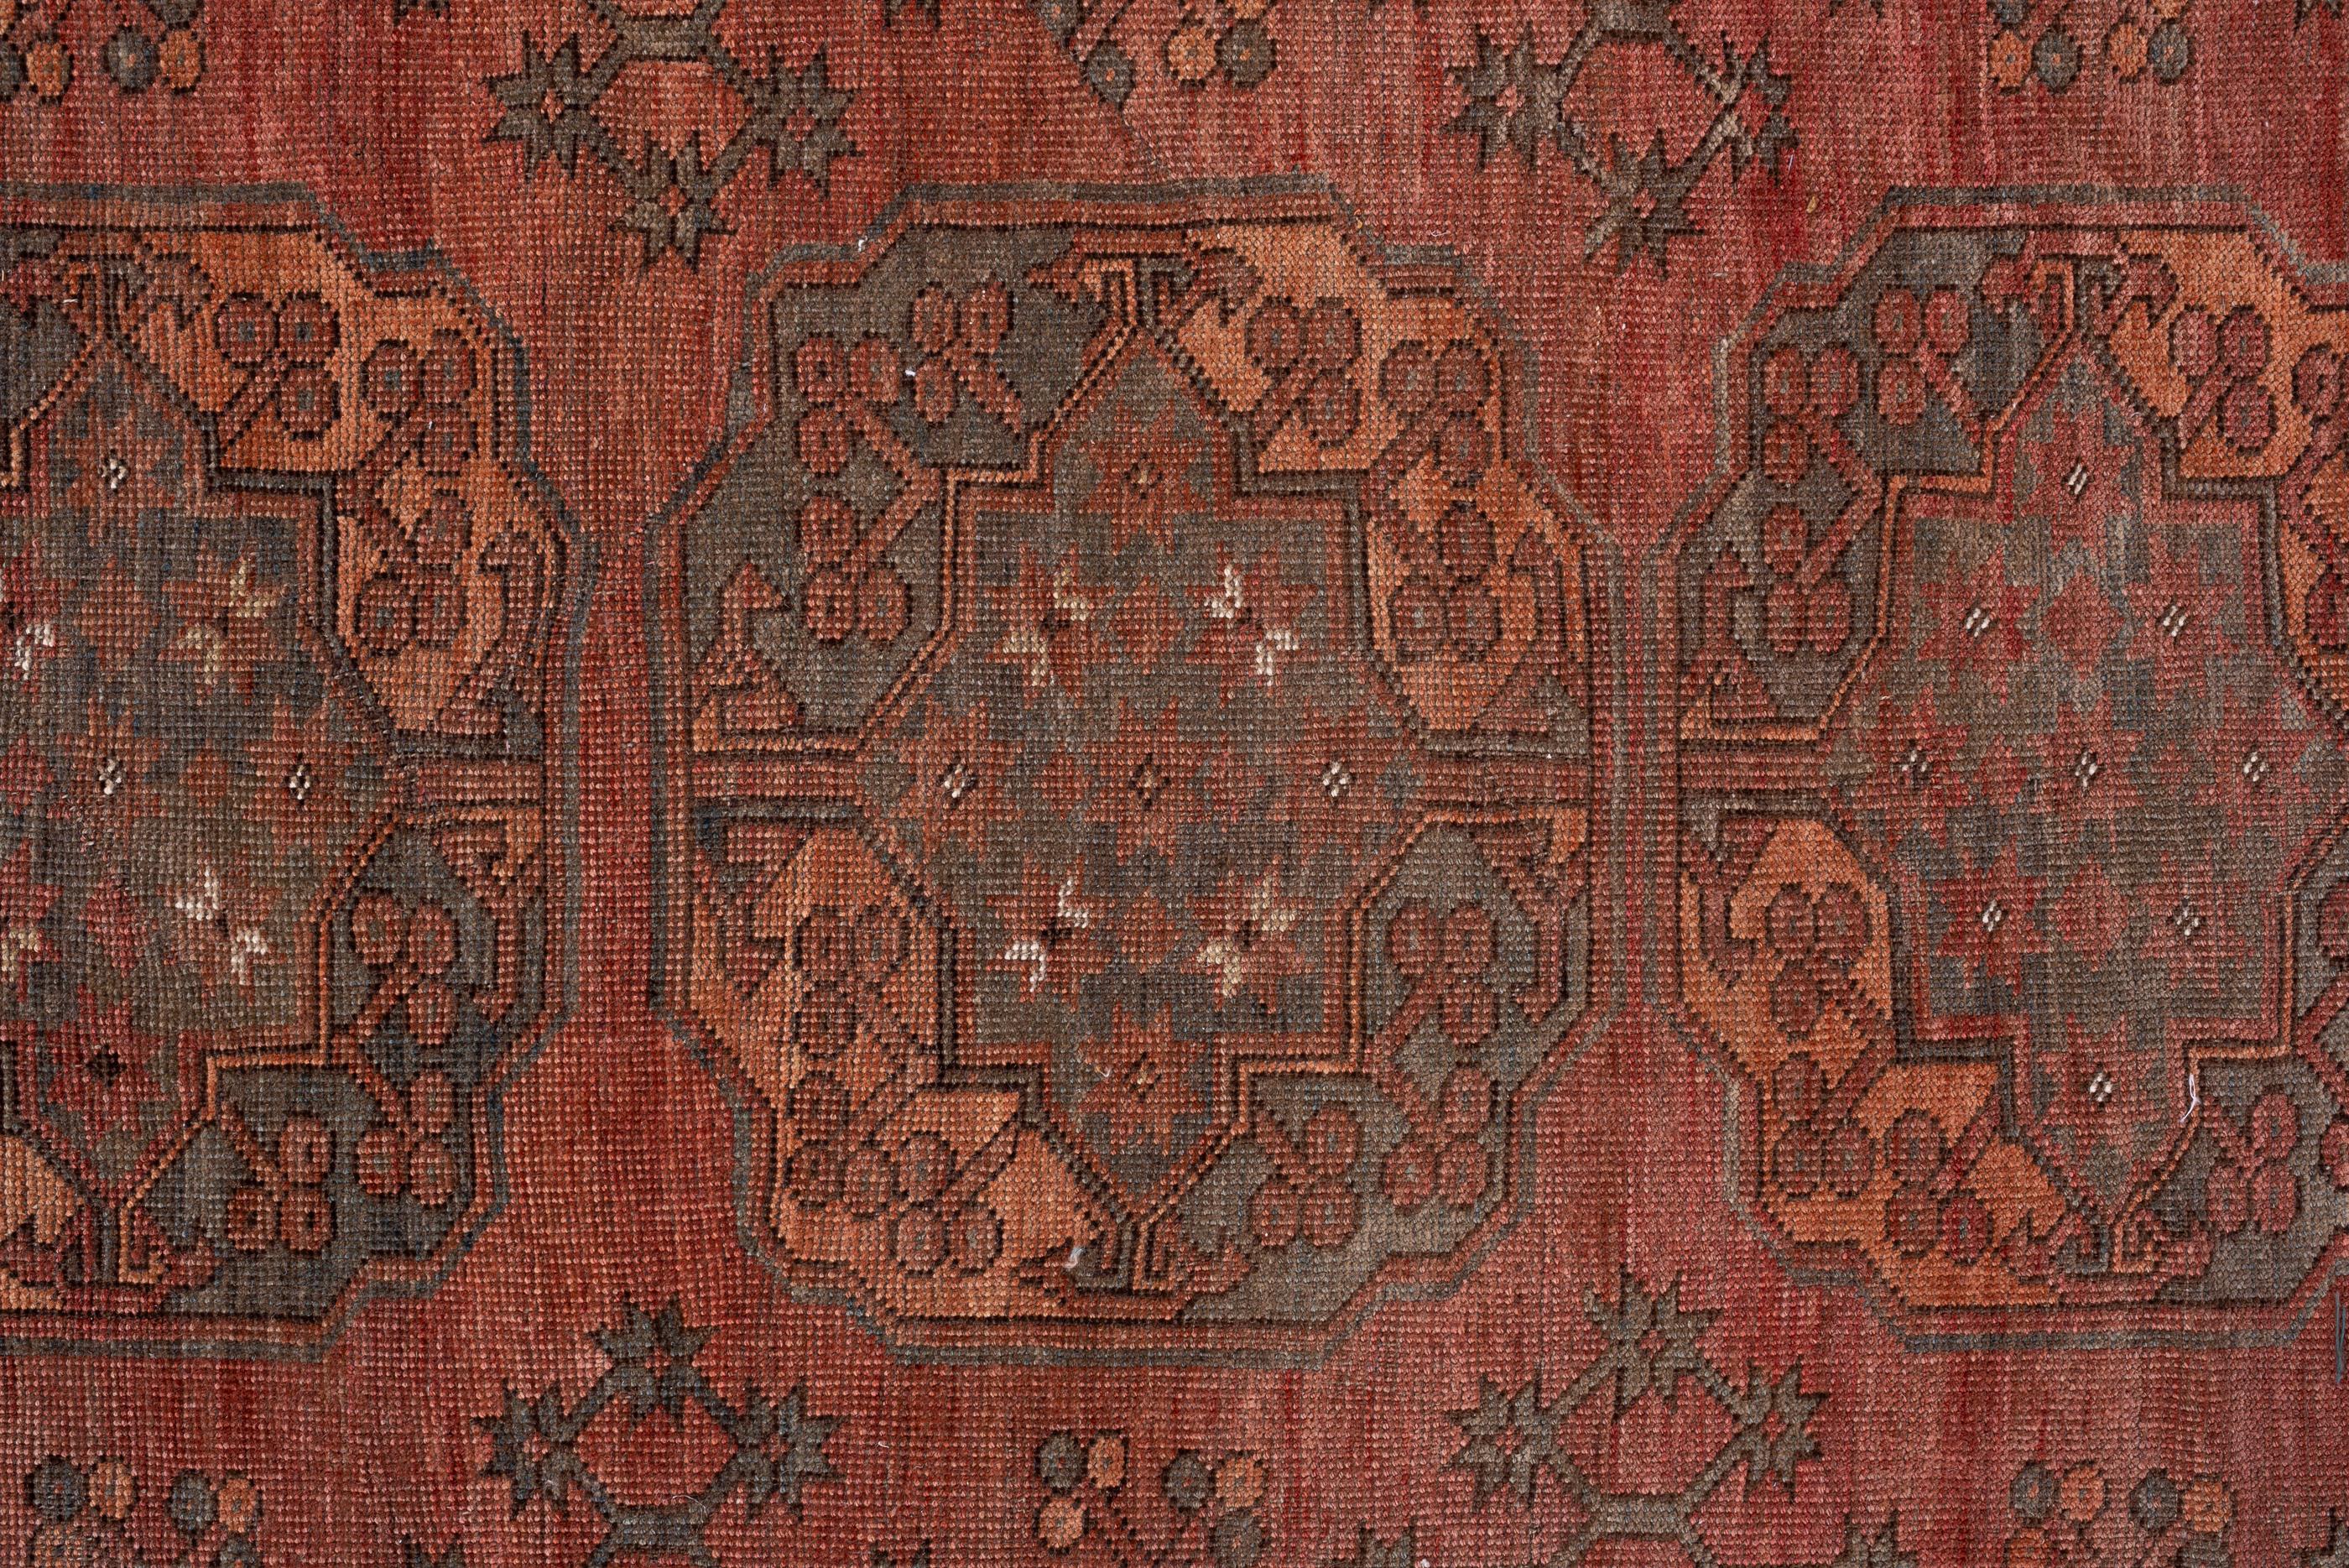 Hand-Knotted Antique Tribal Ersari Rug with Mahogany Field, Circa 1900's